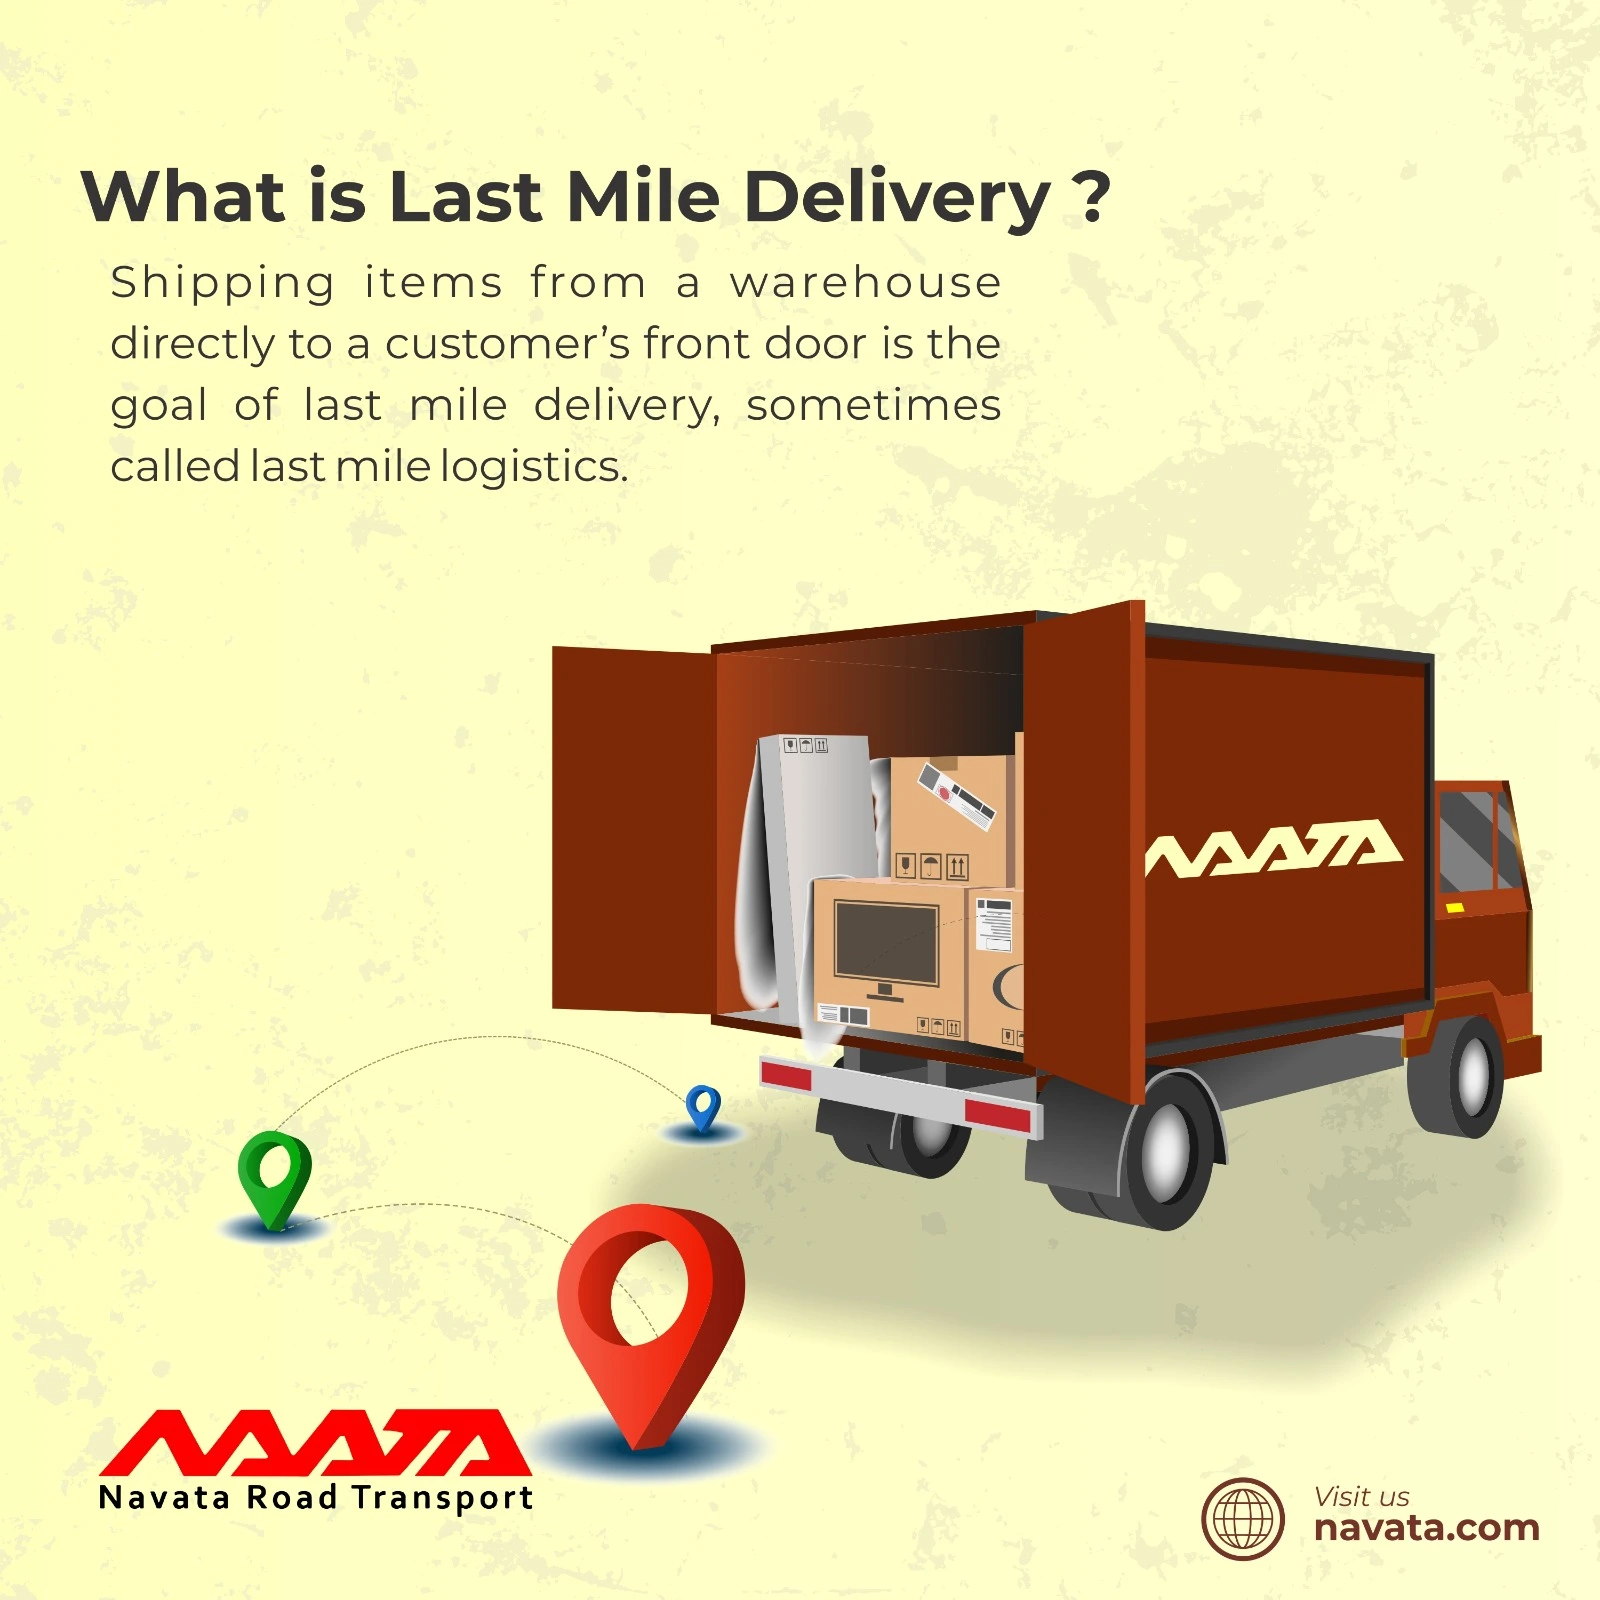 What is Last Mile Delivery?